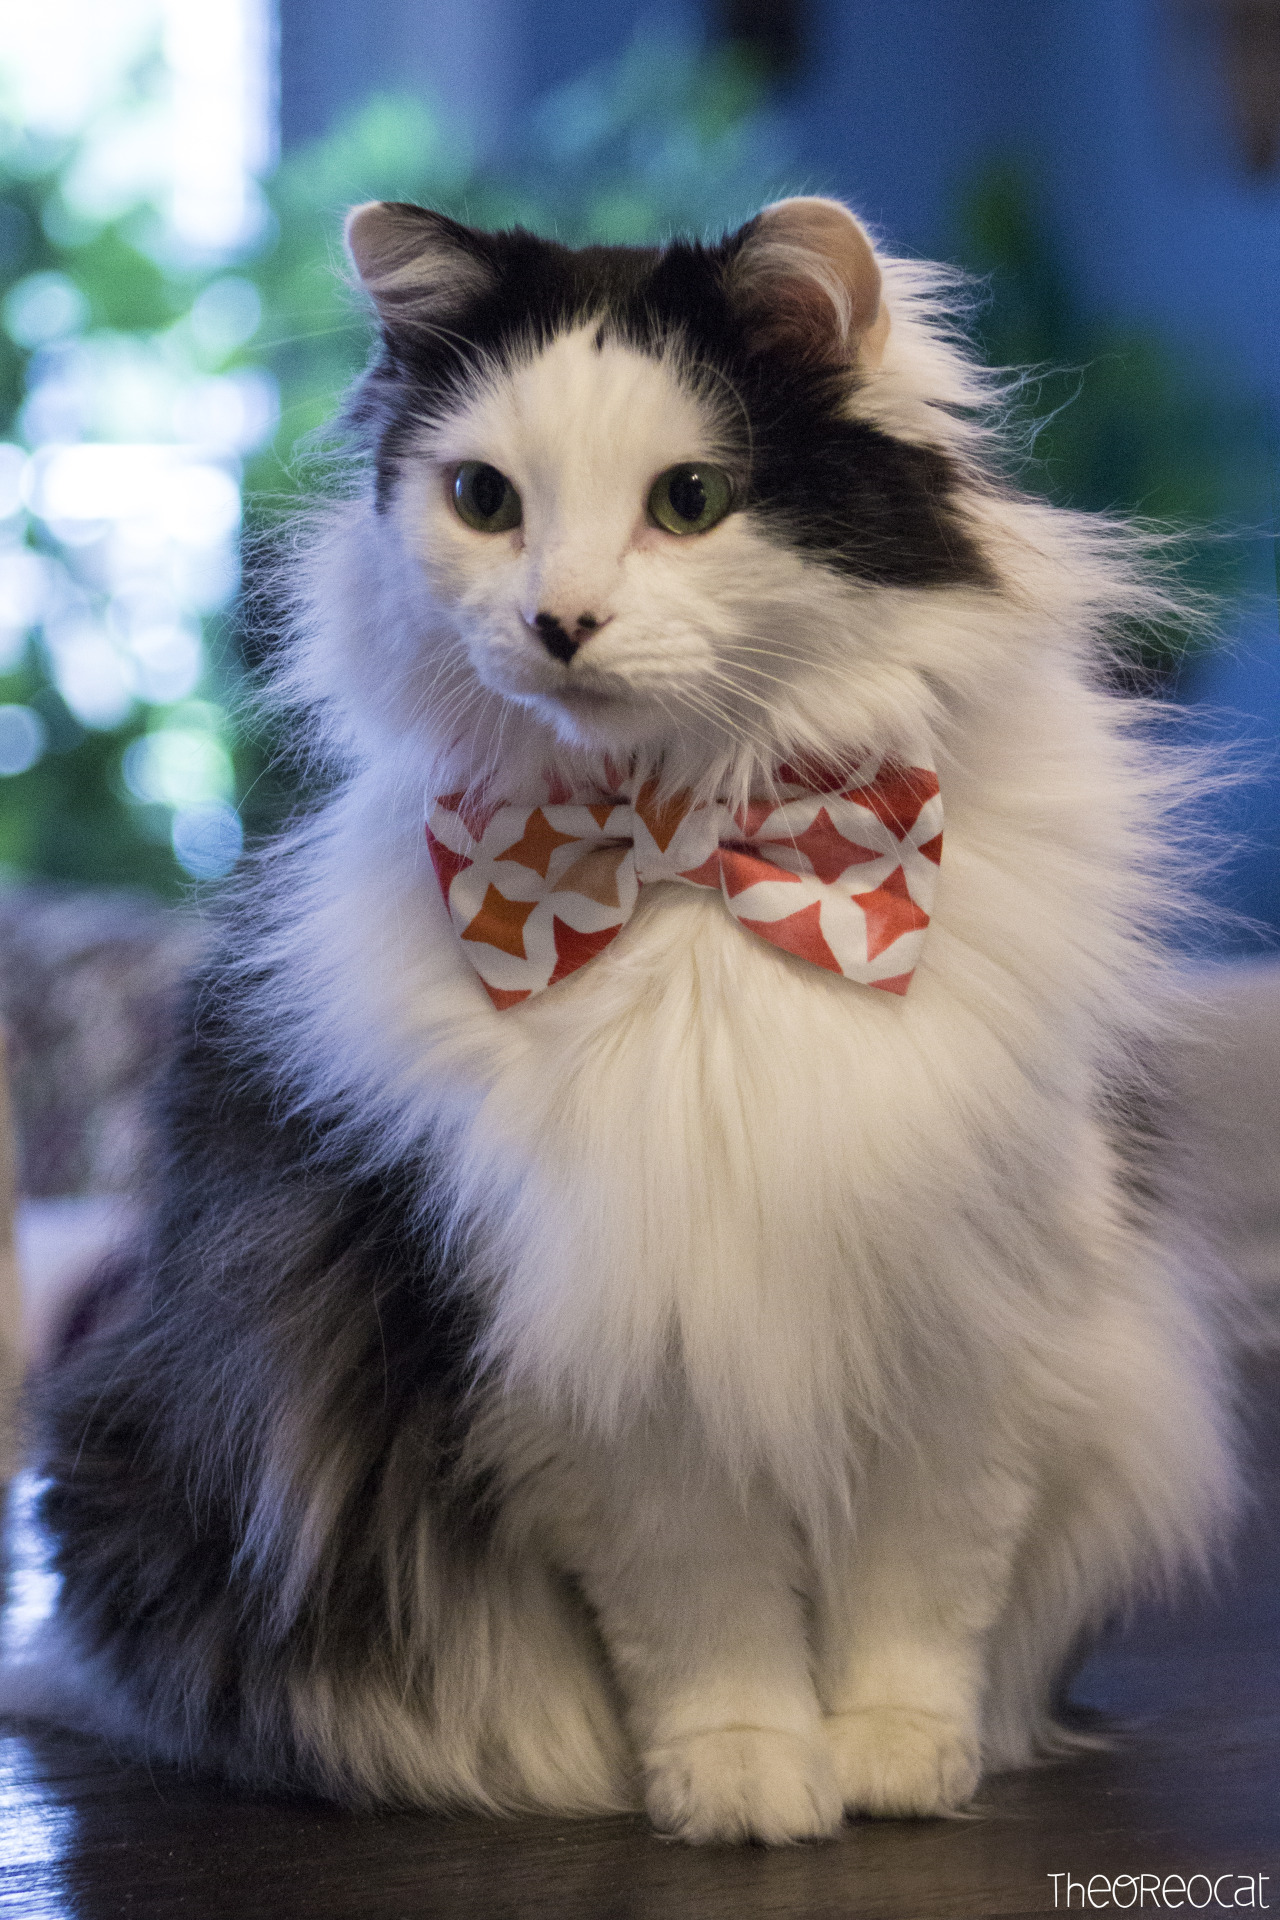 Porn theoreocat:“There is nothing more beautiful photos